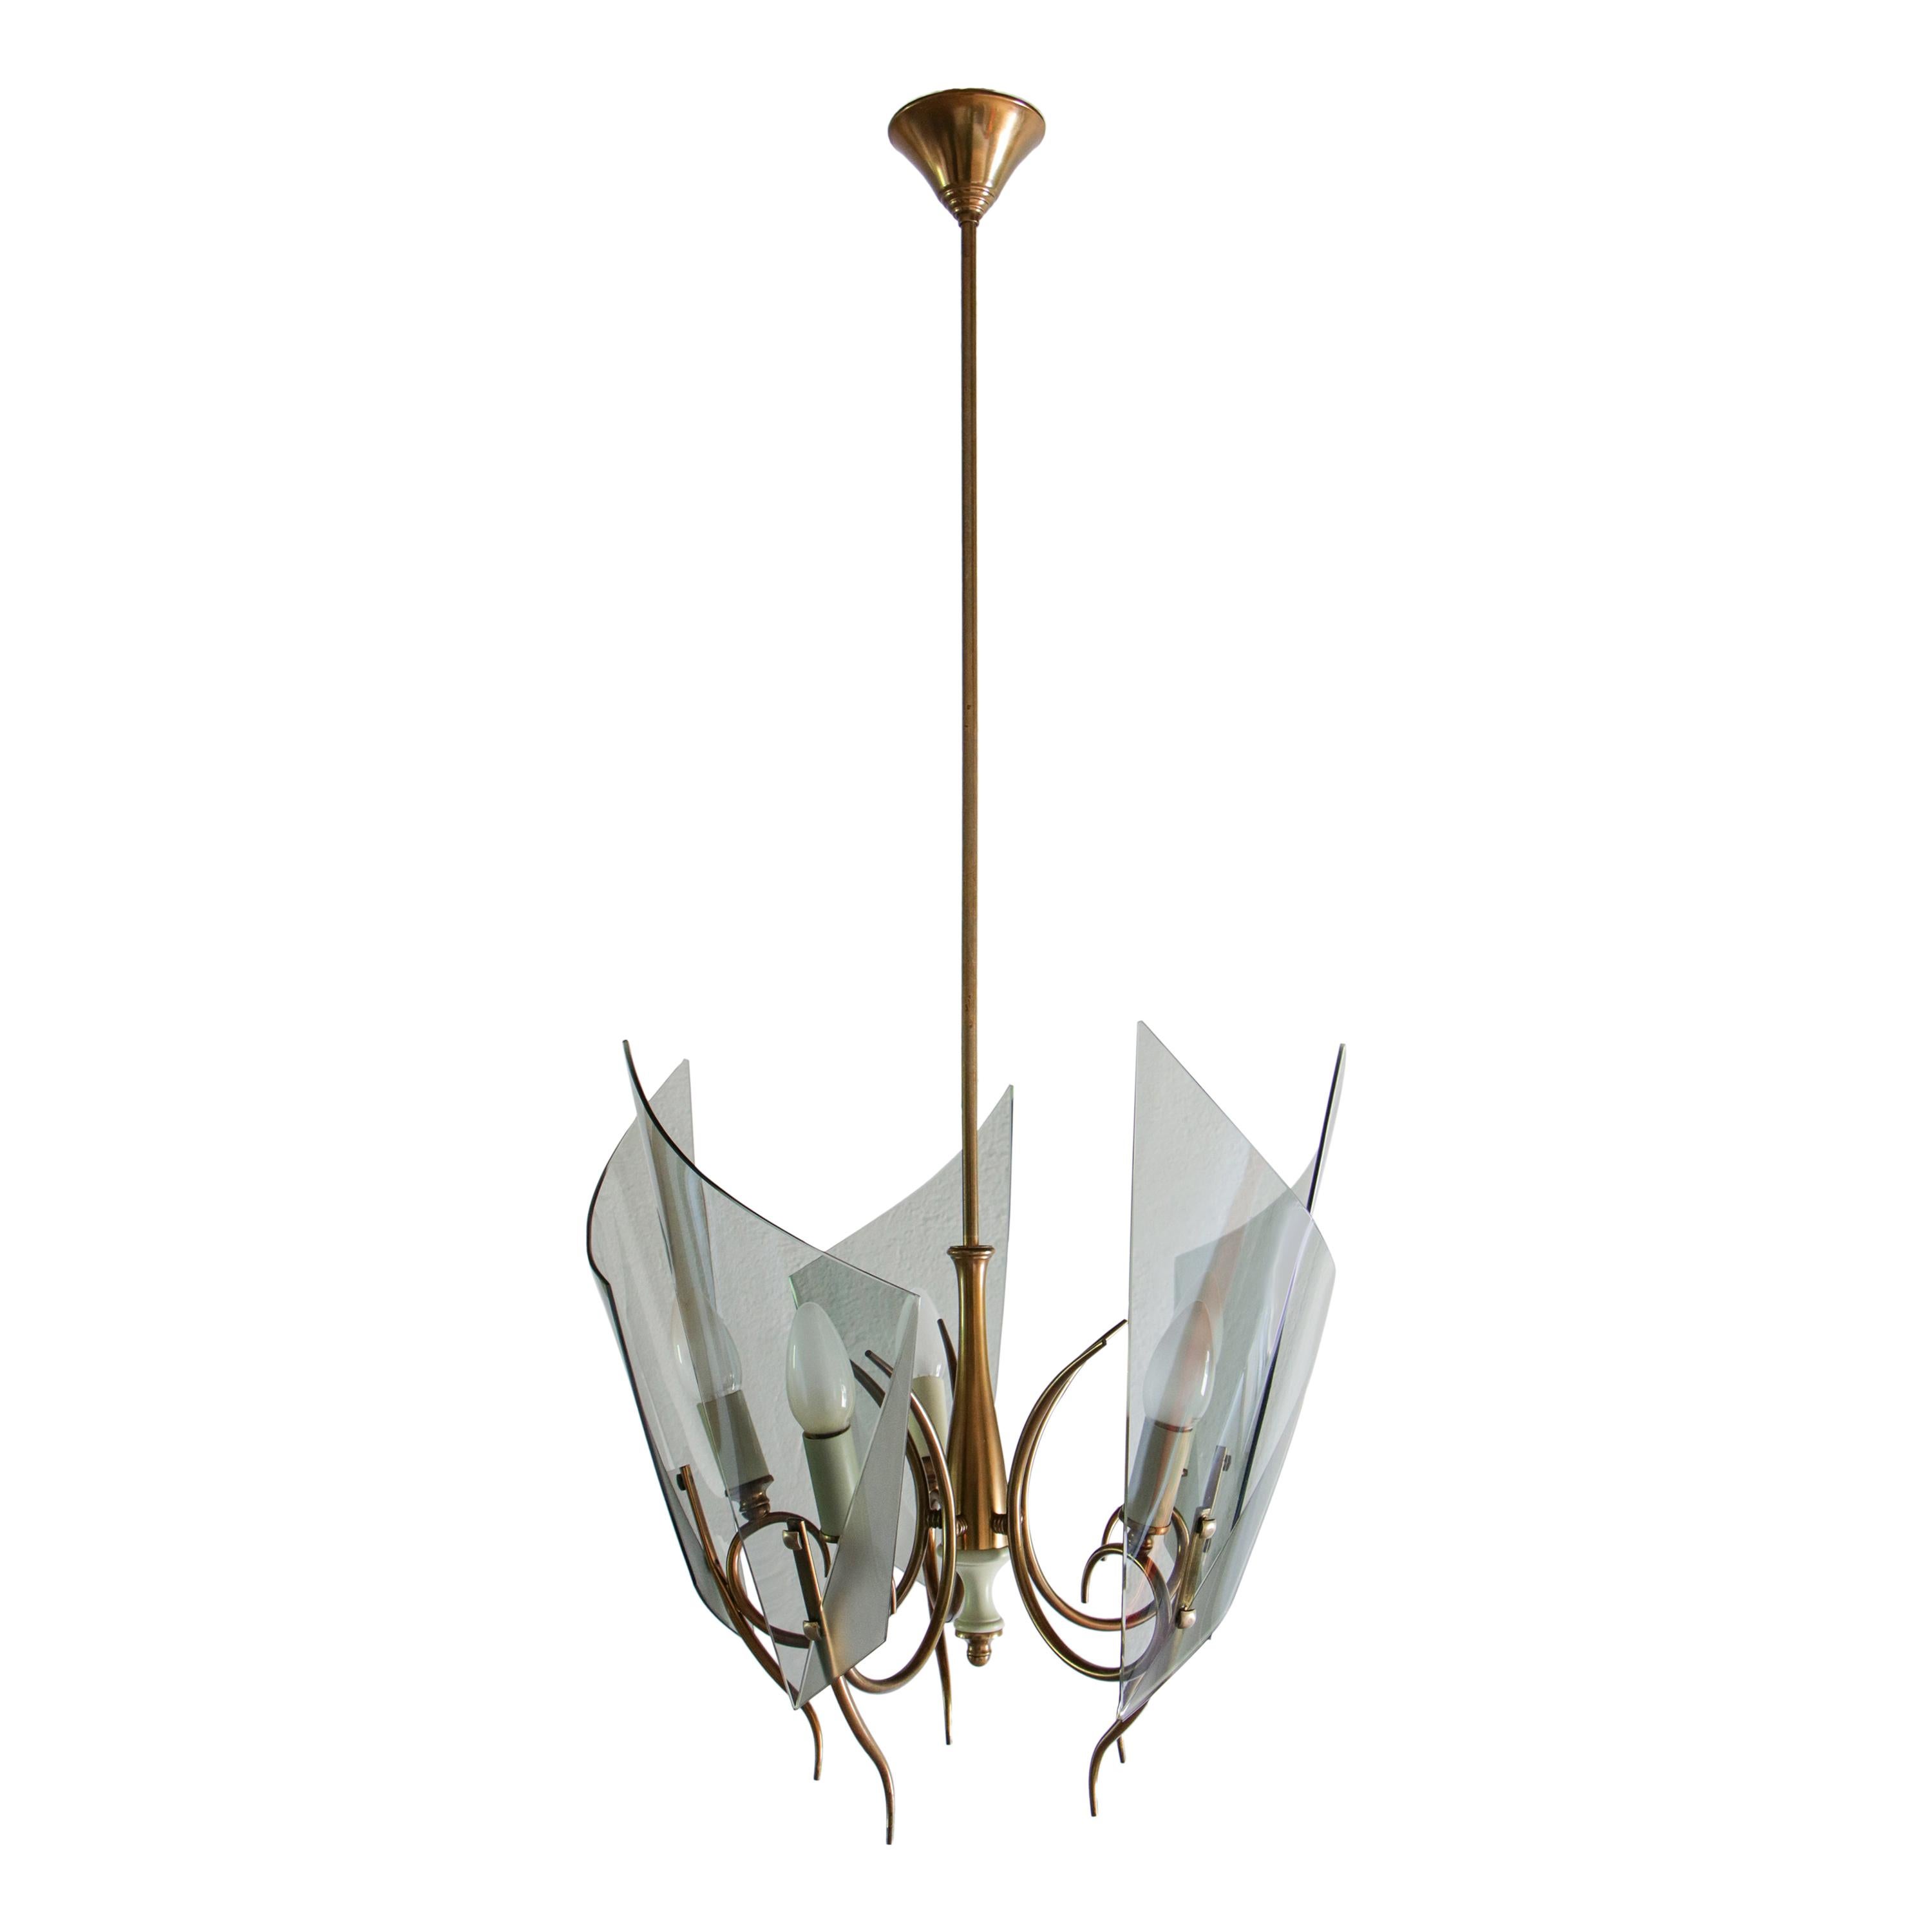 Italian Mid-Century Curved Glass Chandelier Attributed to Fontana Arte, 1950s For Sale